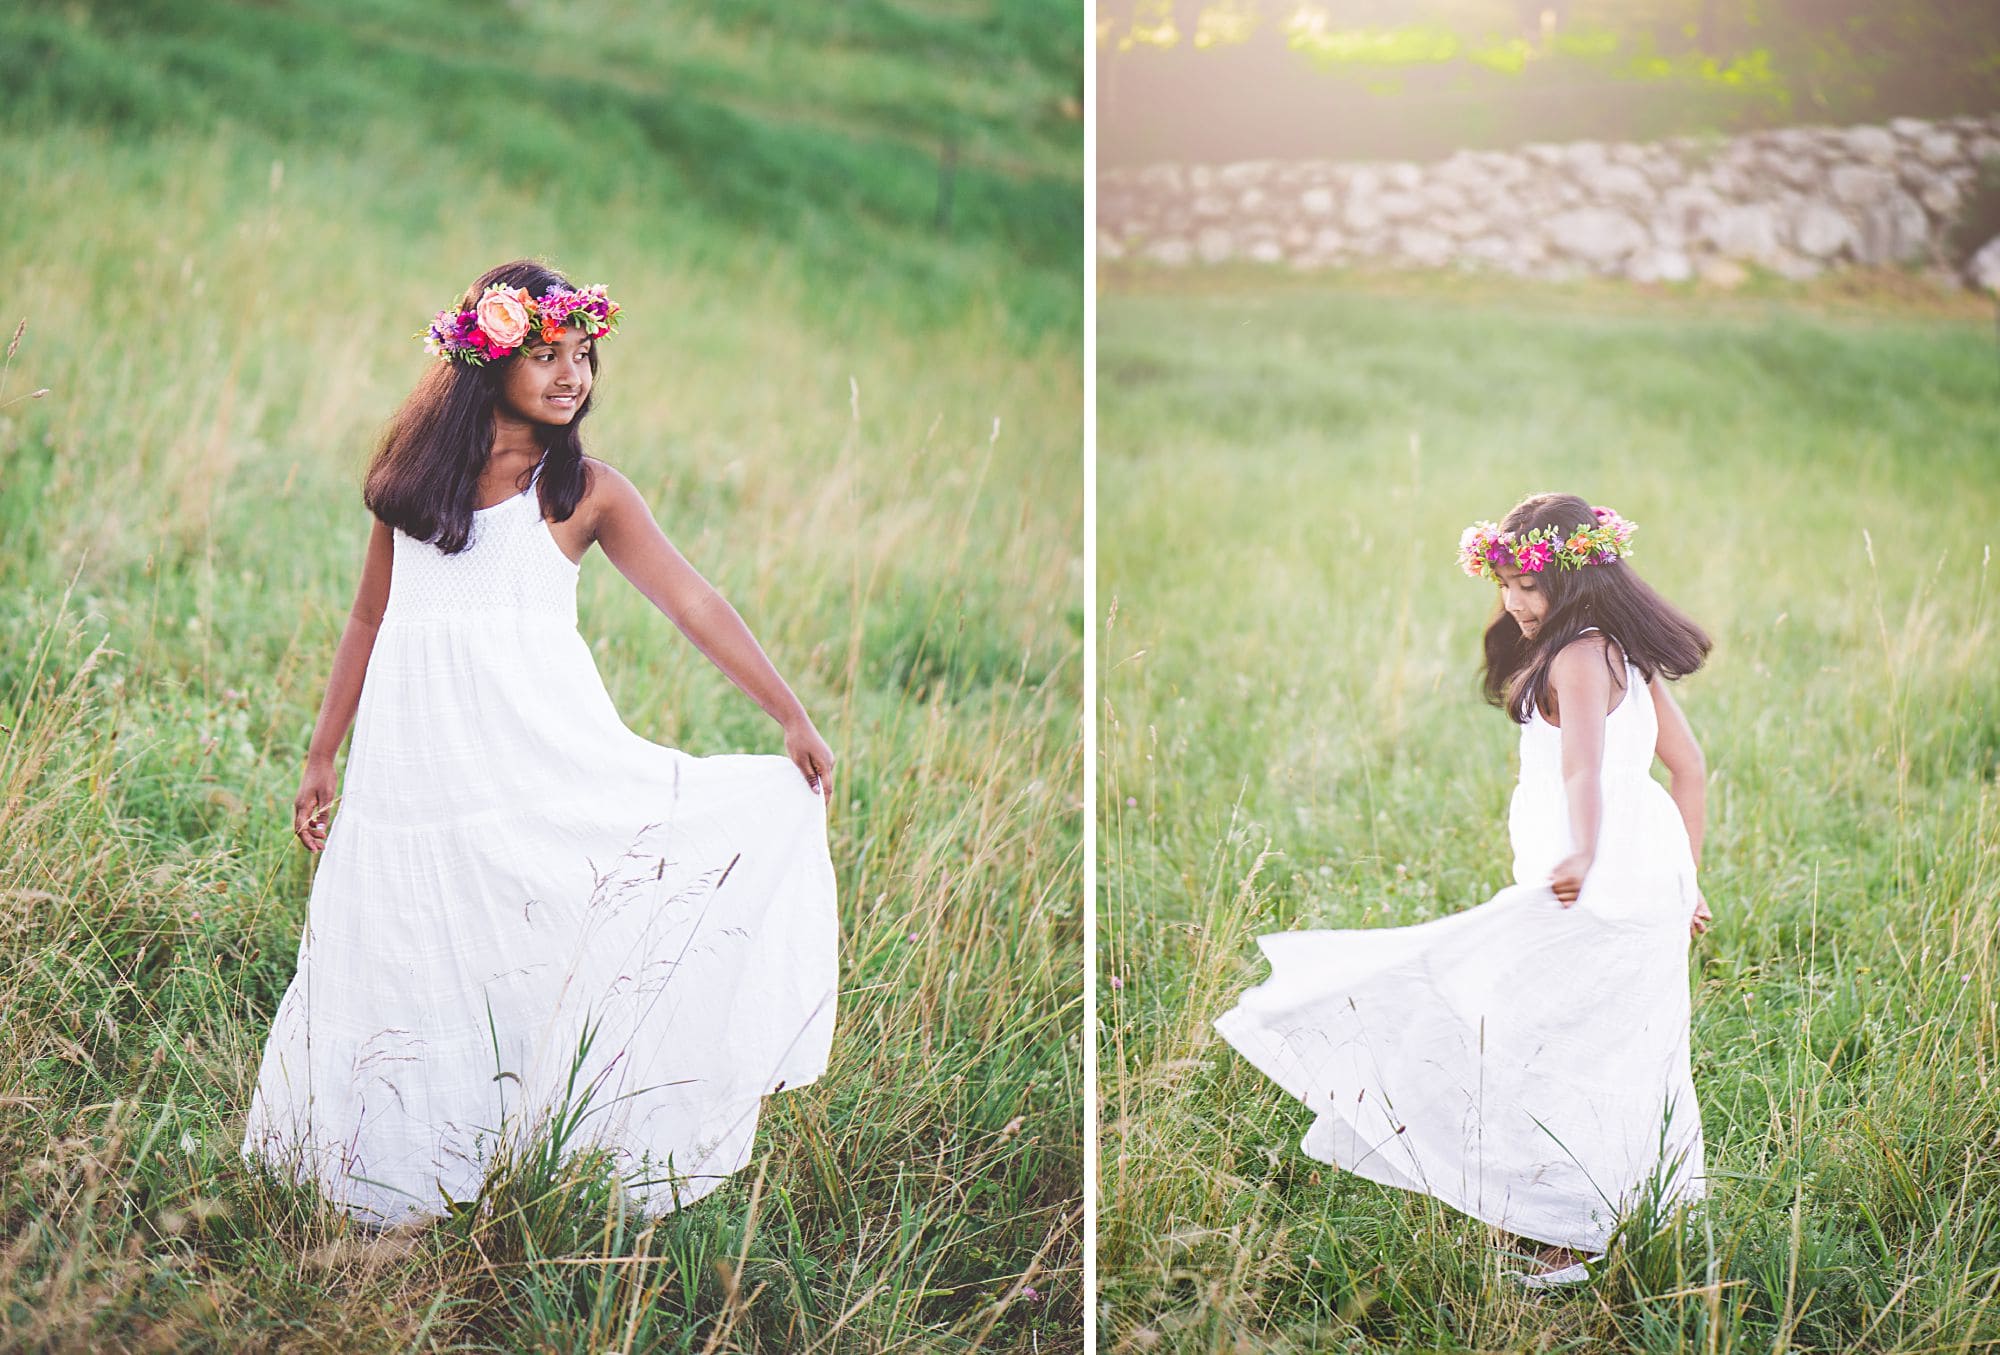 Tween girl dancing in a sunny field with a white dress and flower crown